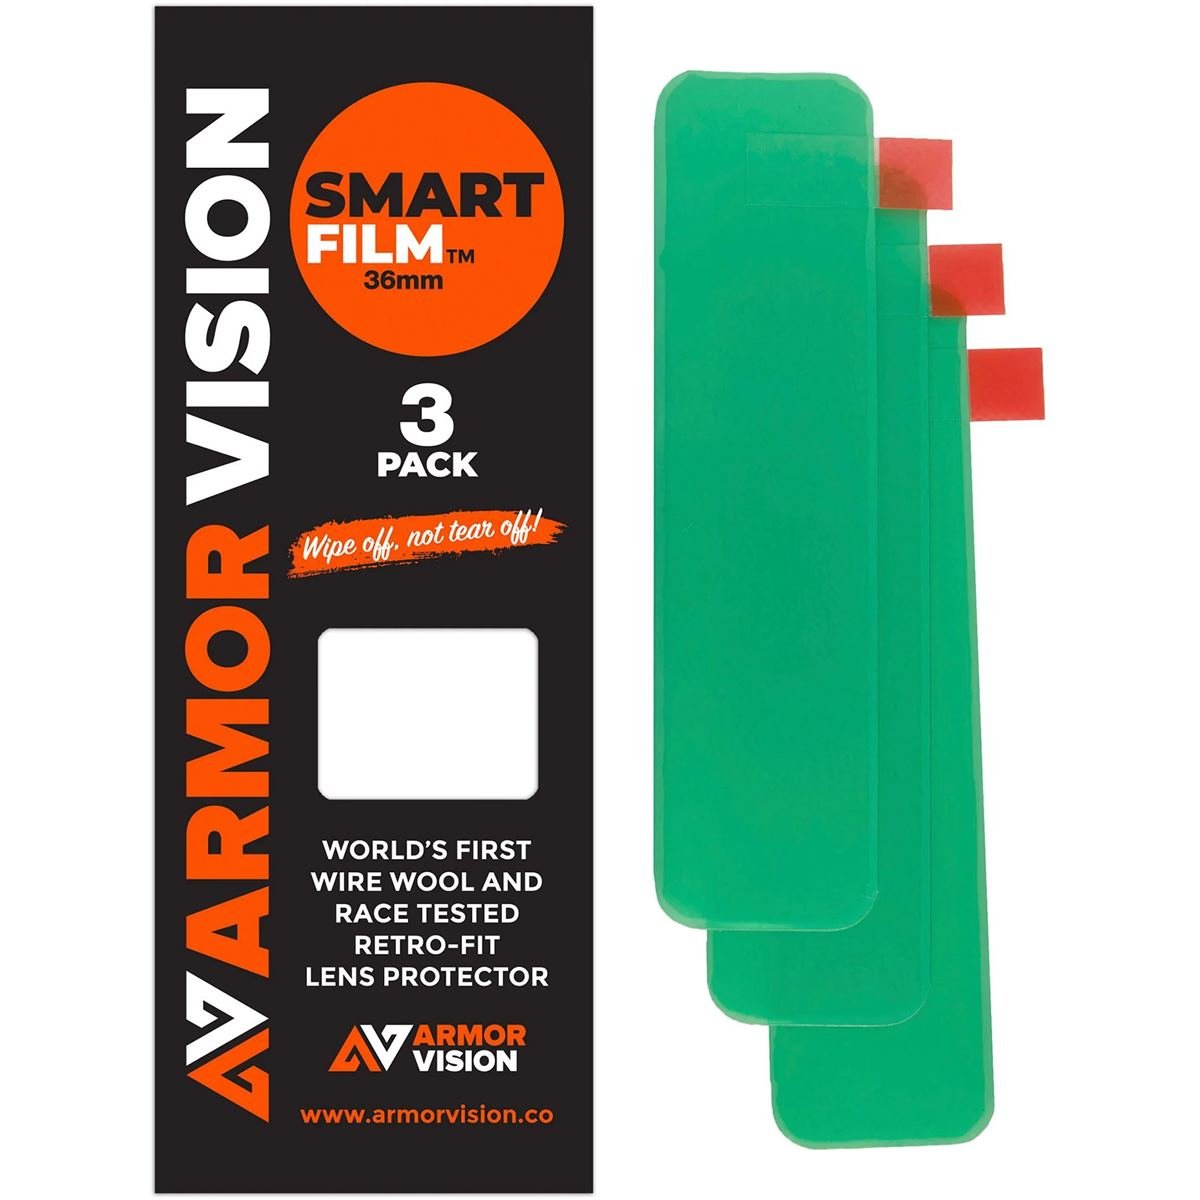 armor-vision-smart-film-lens-protector-1__PID:558aacc6-072f-4dcb-ad70-d64b648f9f46